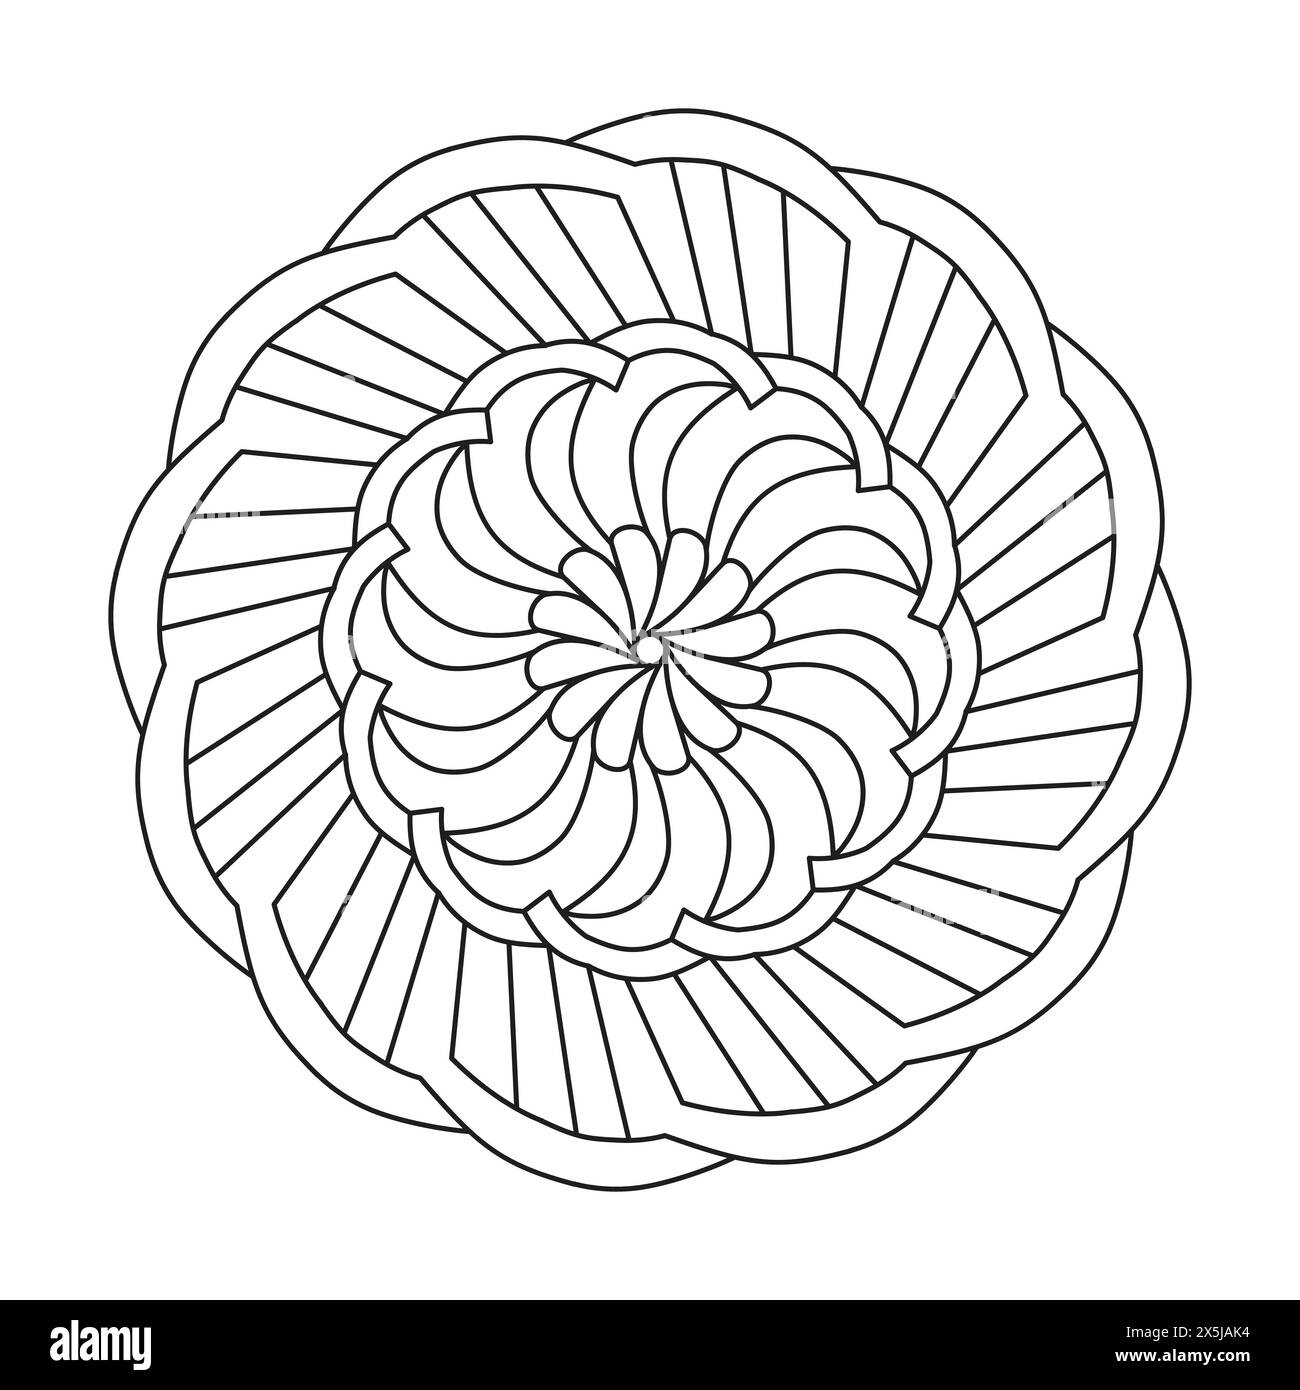 Mandala Harmonic Colouring Book Page for KDP Book Interior. Peaceful Petals, Ability to Relax, Brain Experiences, Harmonious Haven, Peaceful Portraits, Stock Vector